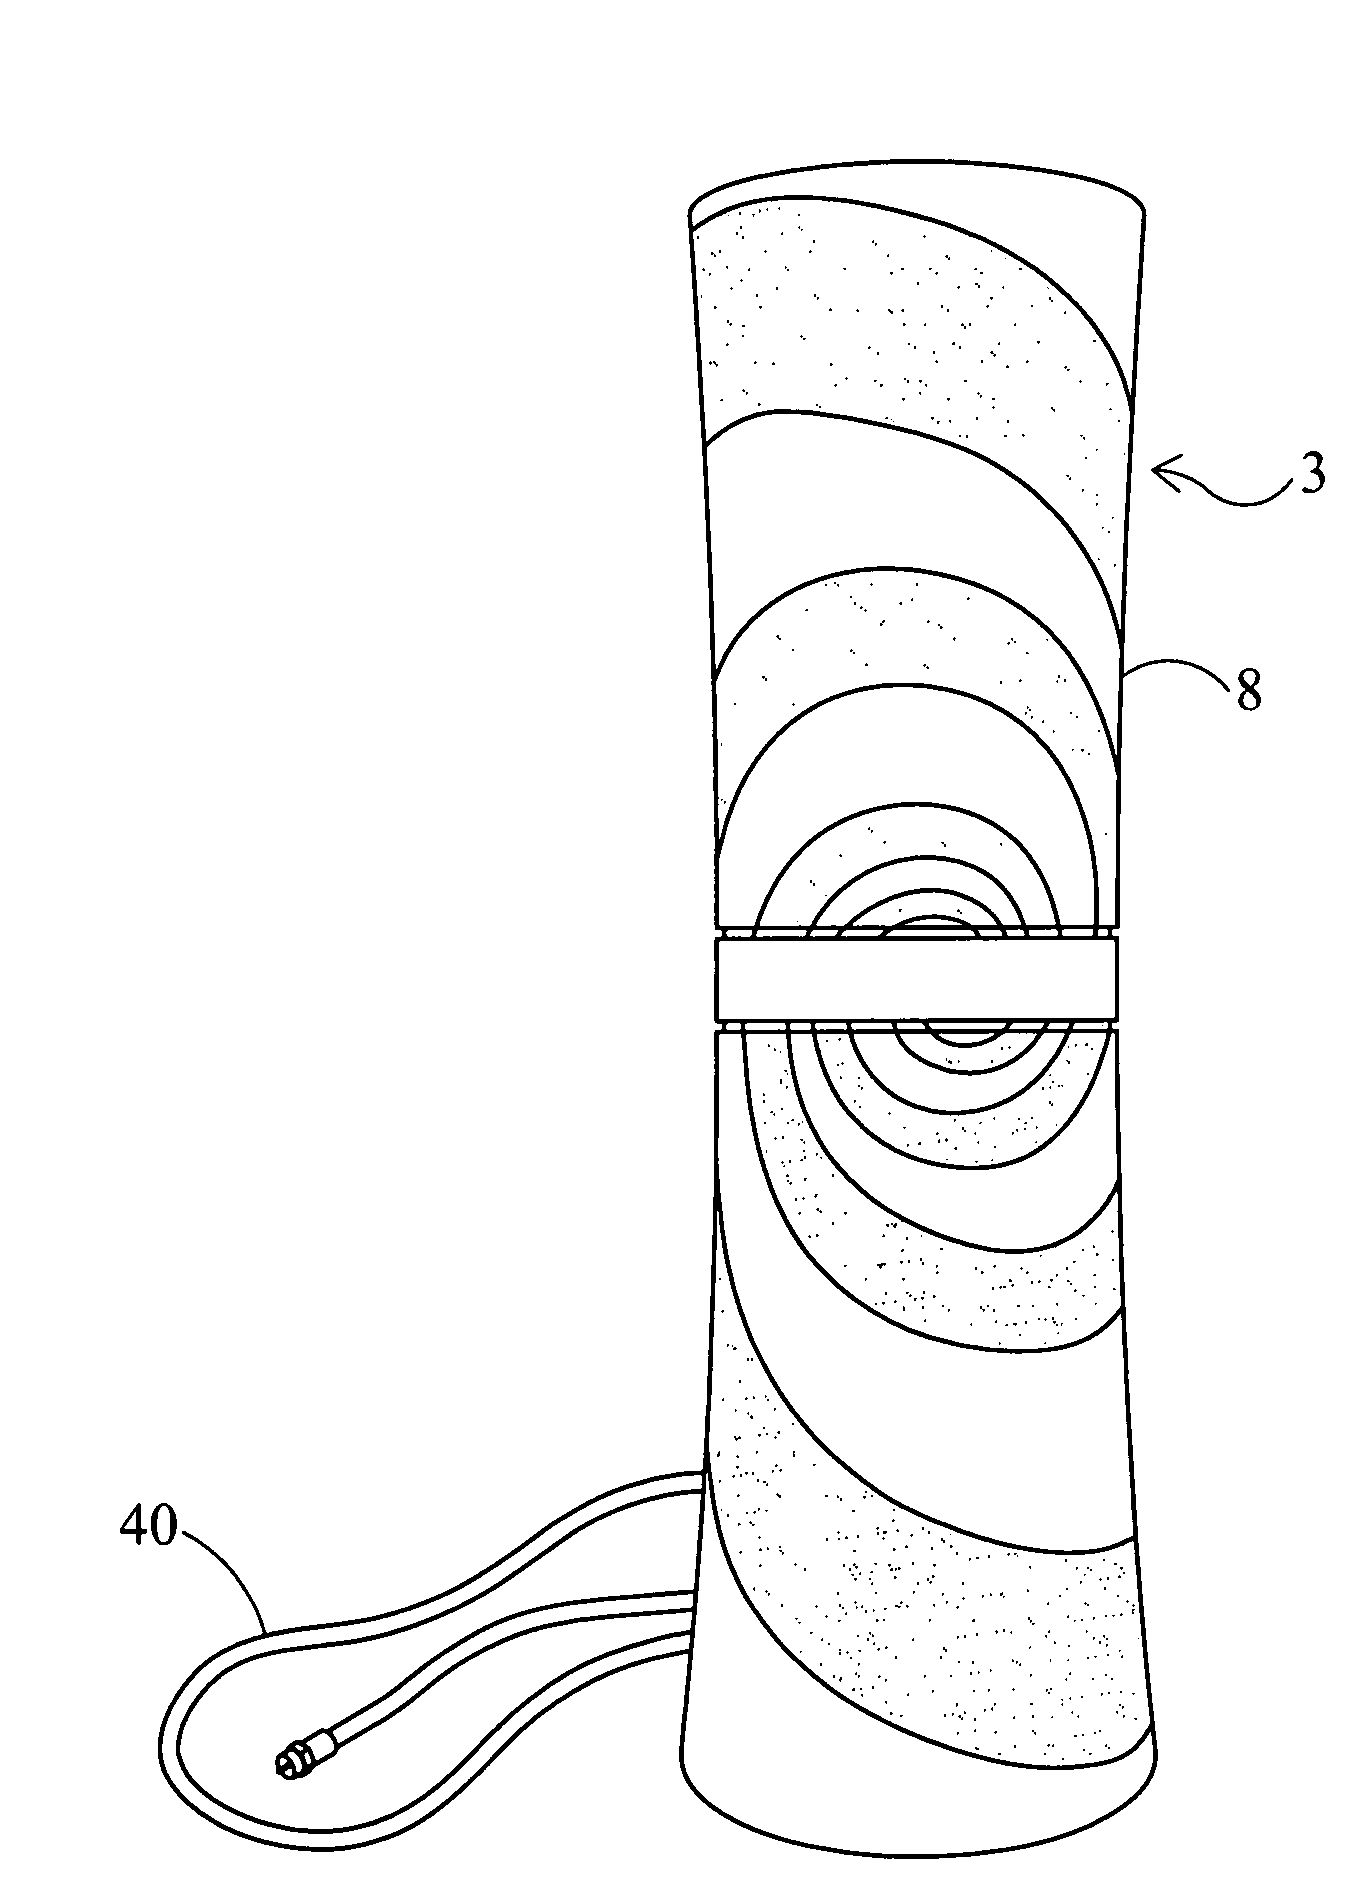 Omni-directional antenna in an hourglass-shaped vase housing